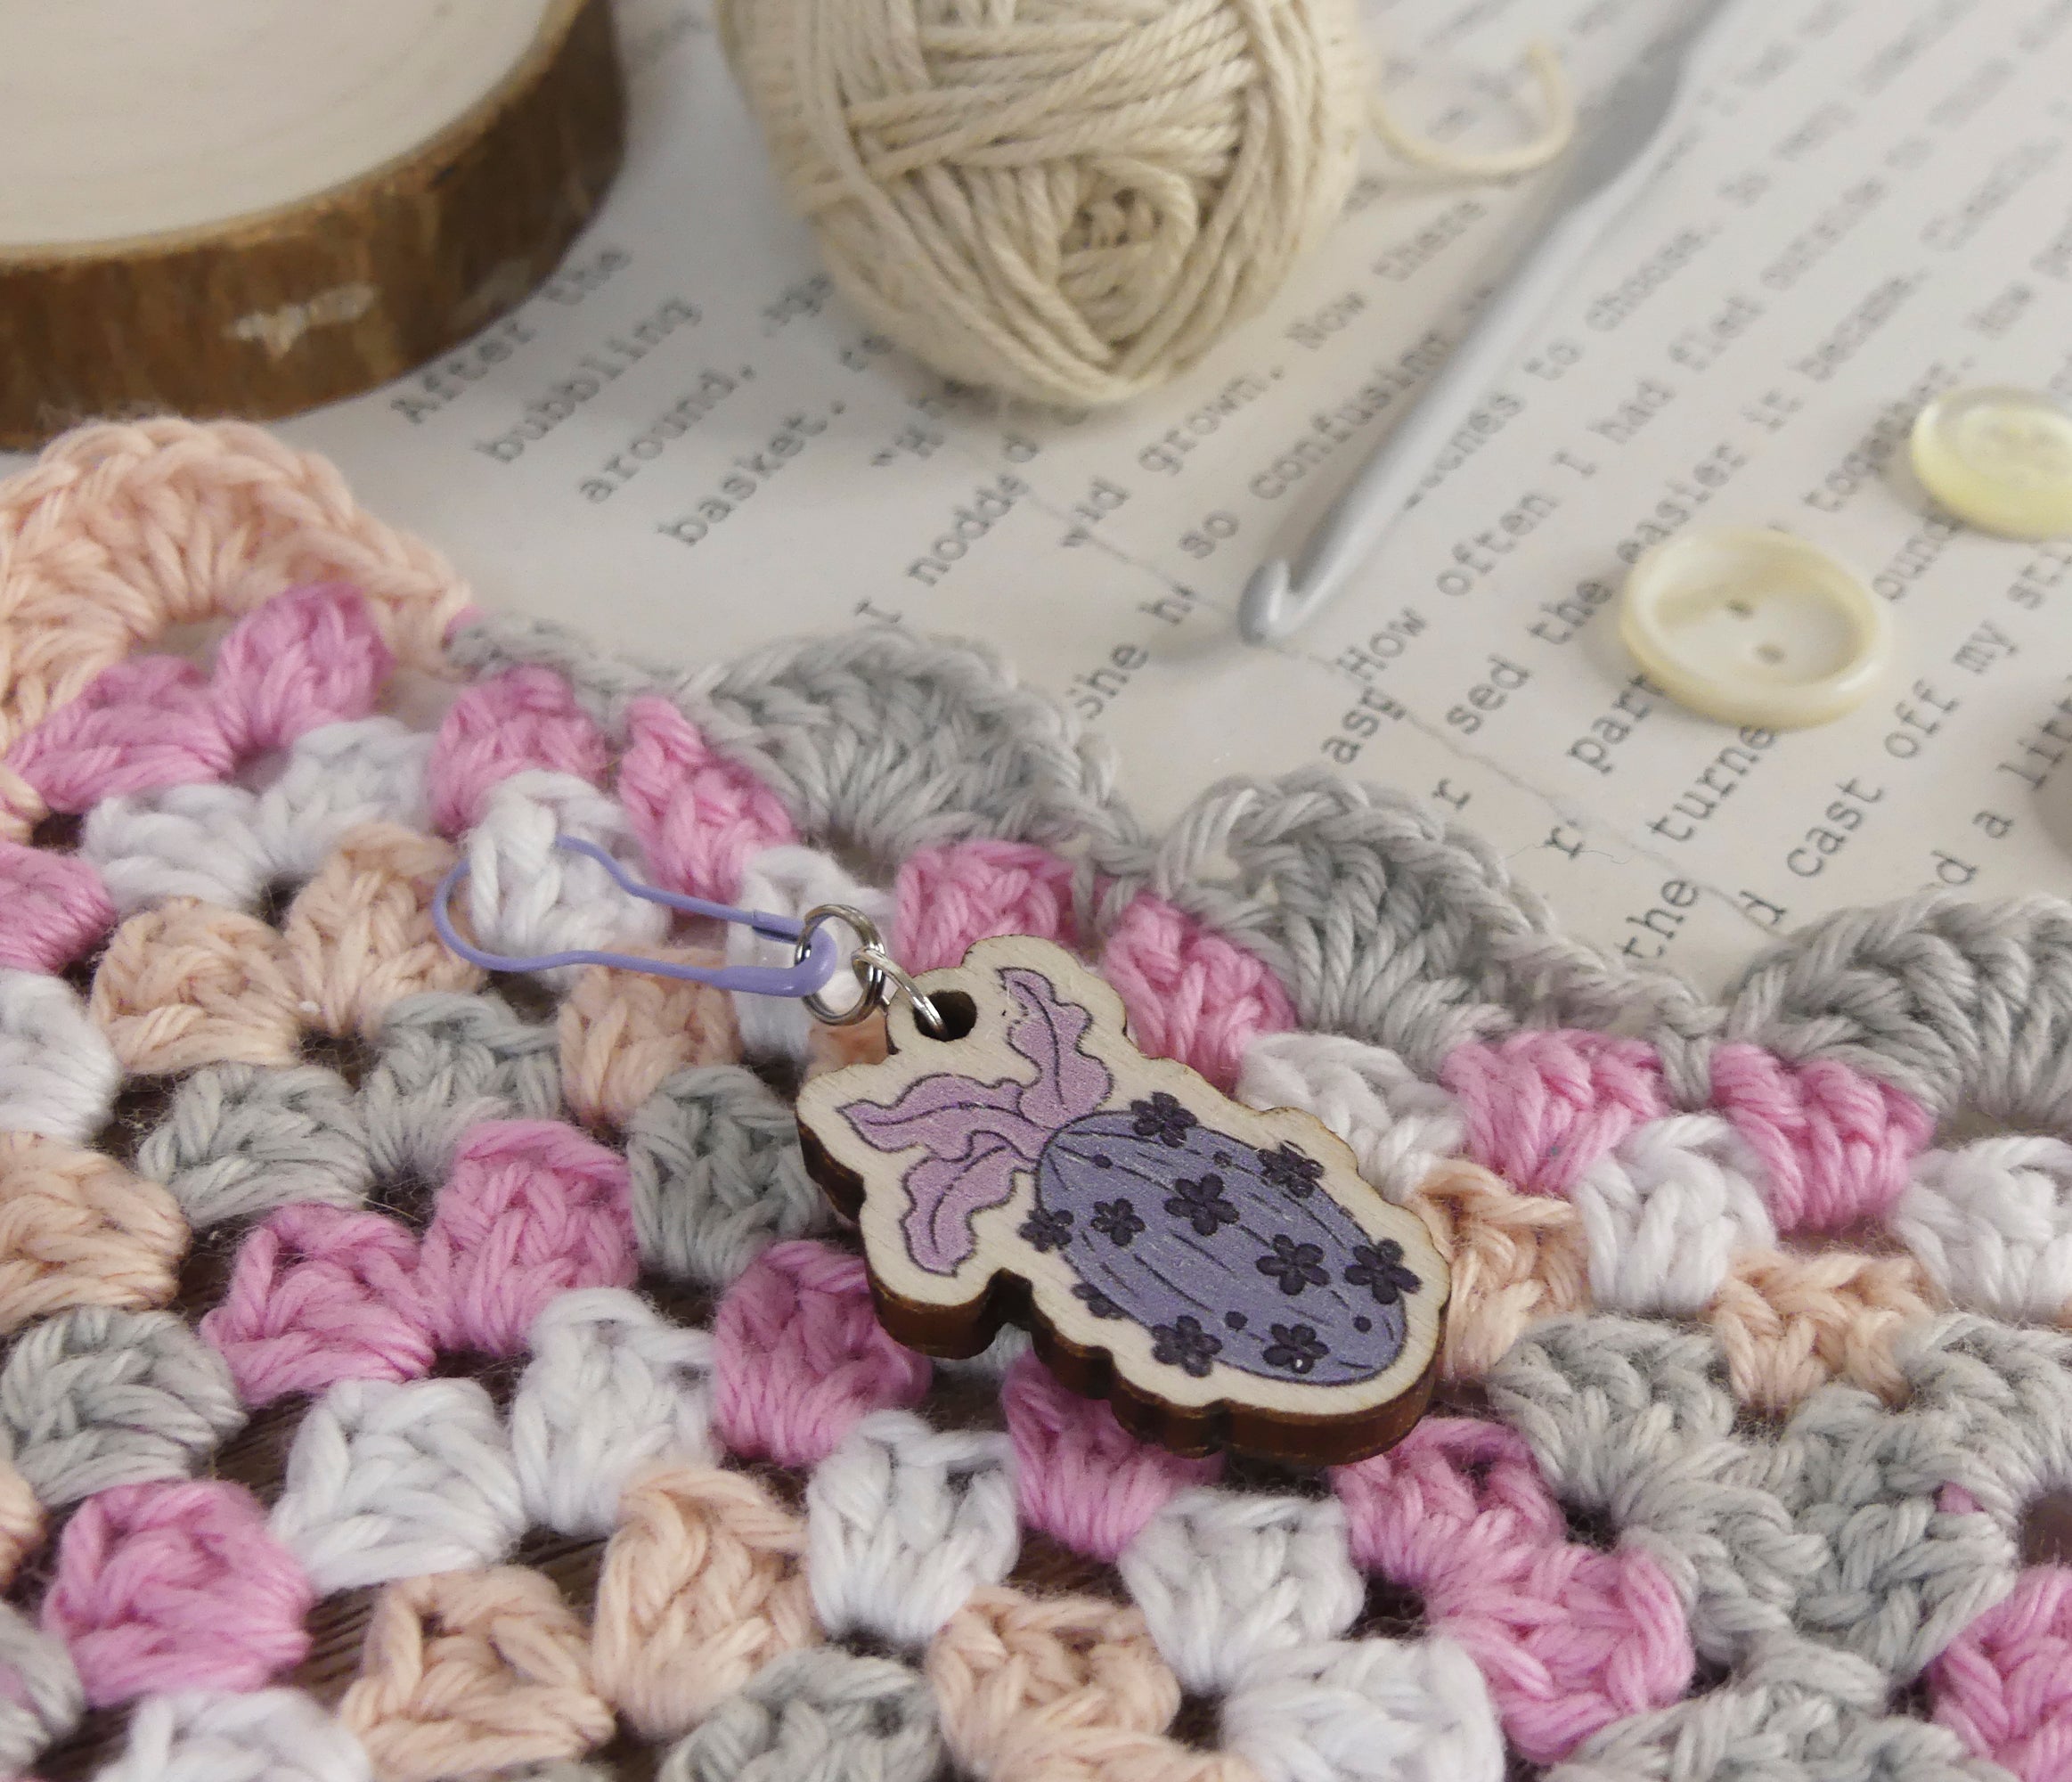 Floral Stitch Markers